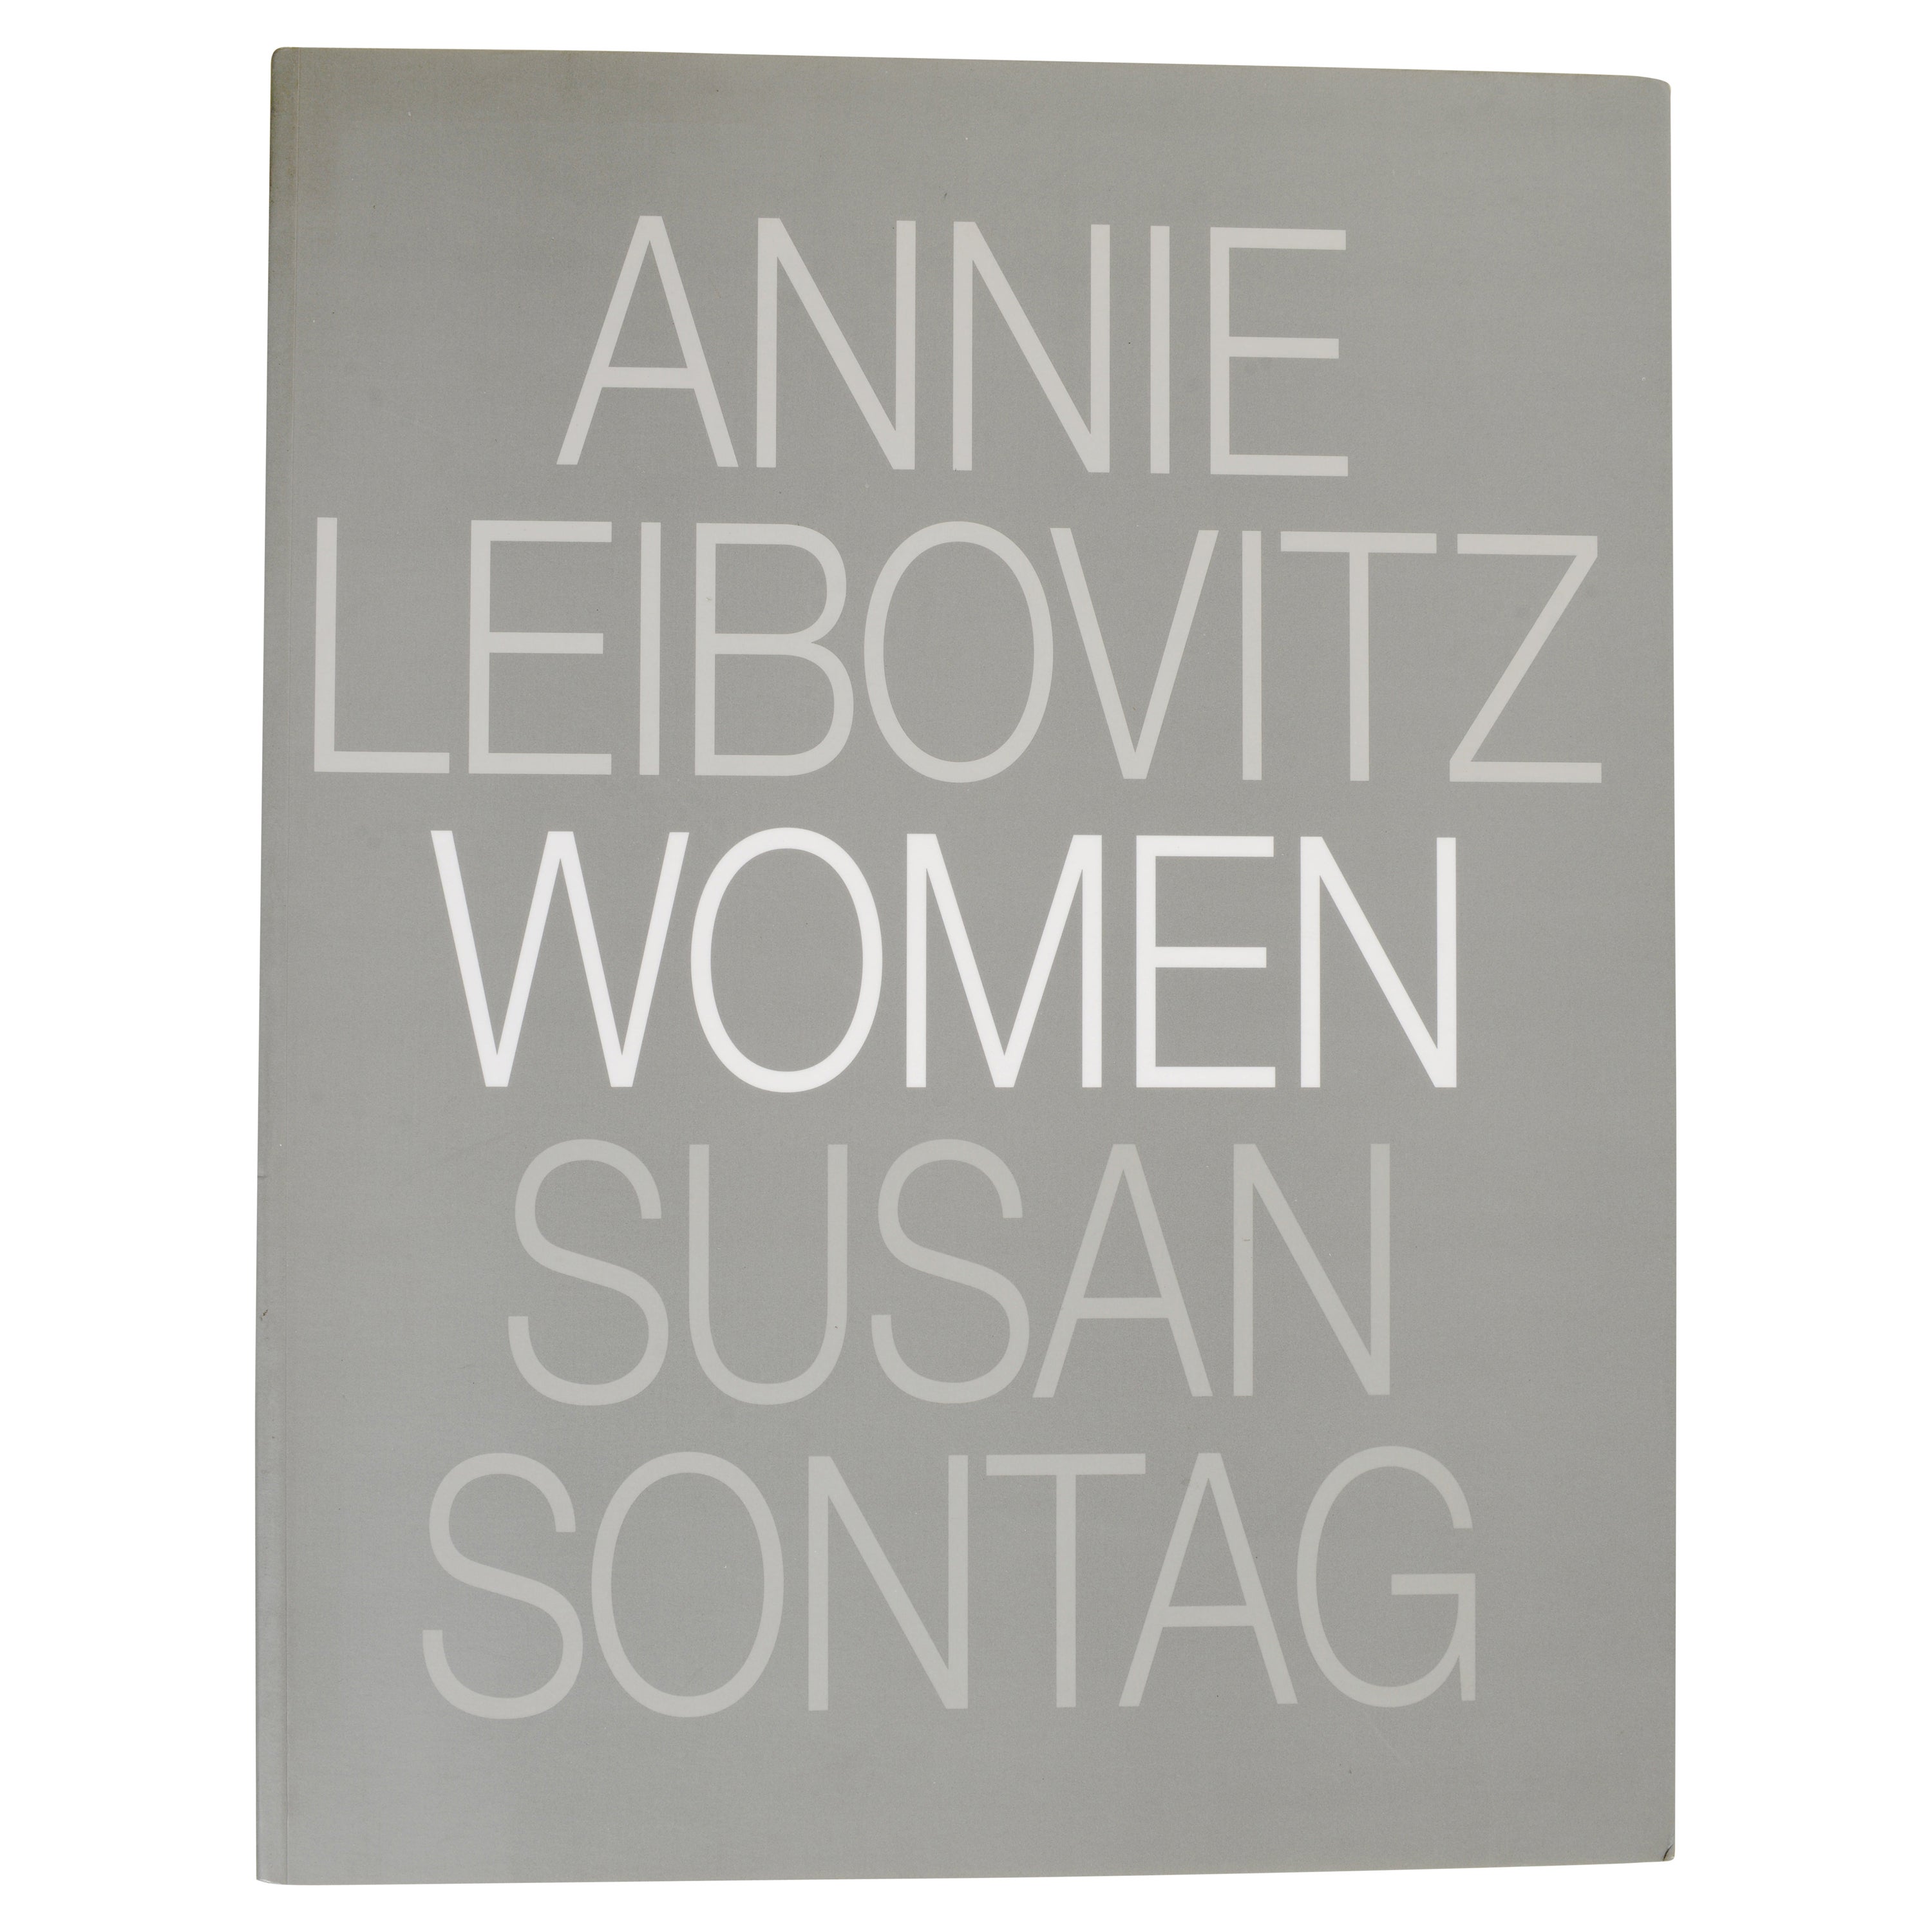 Women by Annie Leibovitz and Susan Sontag, Stated First Edition